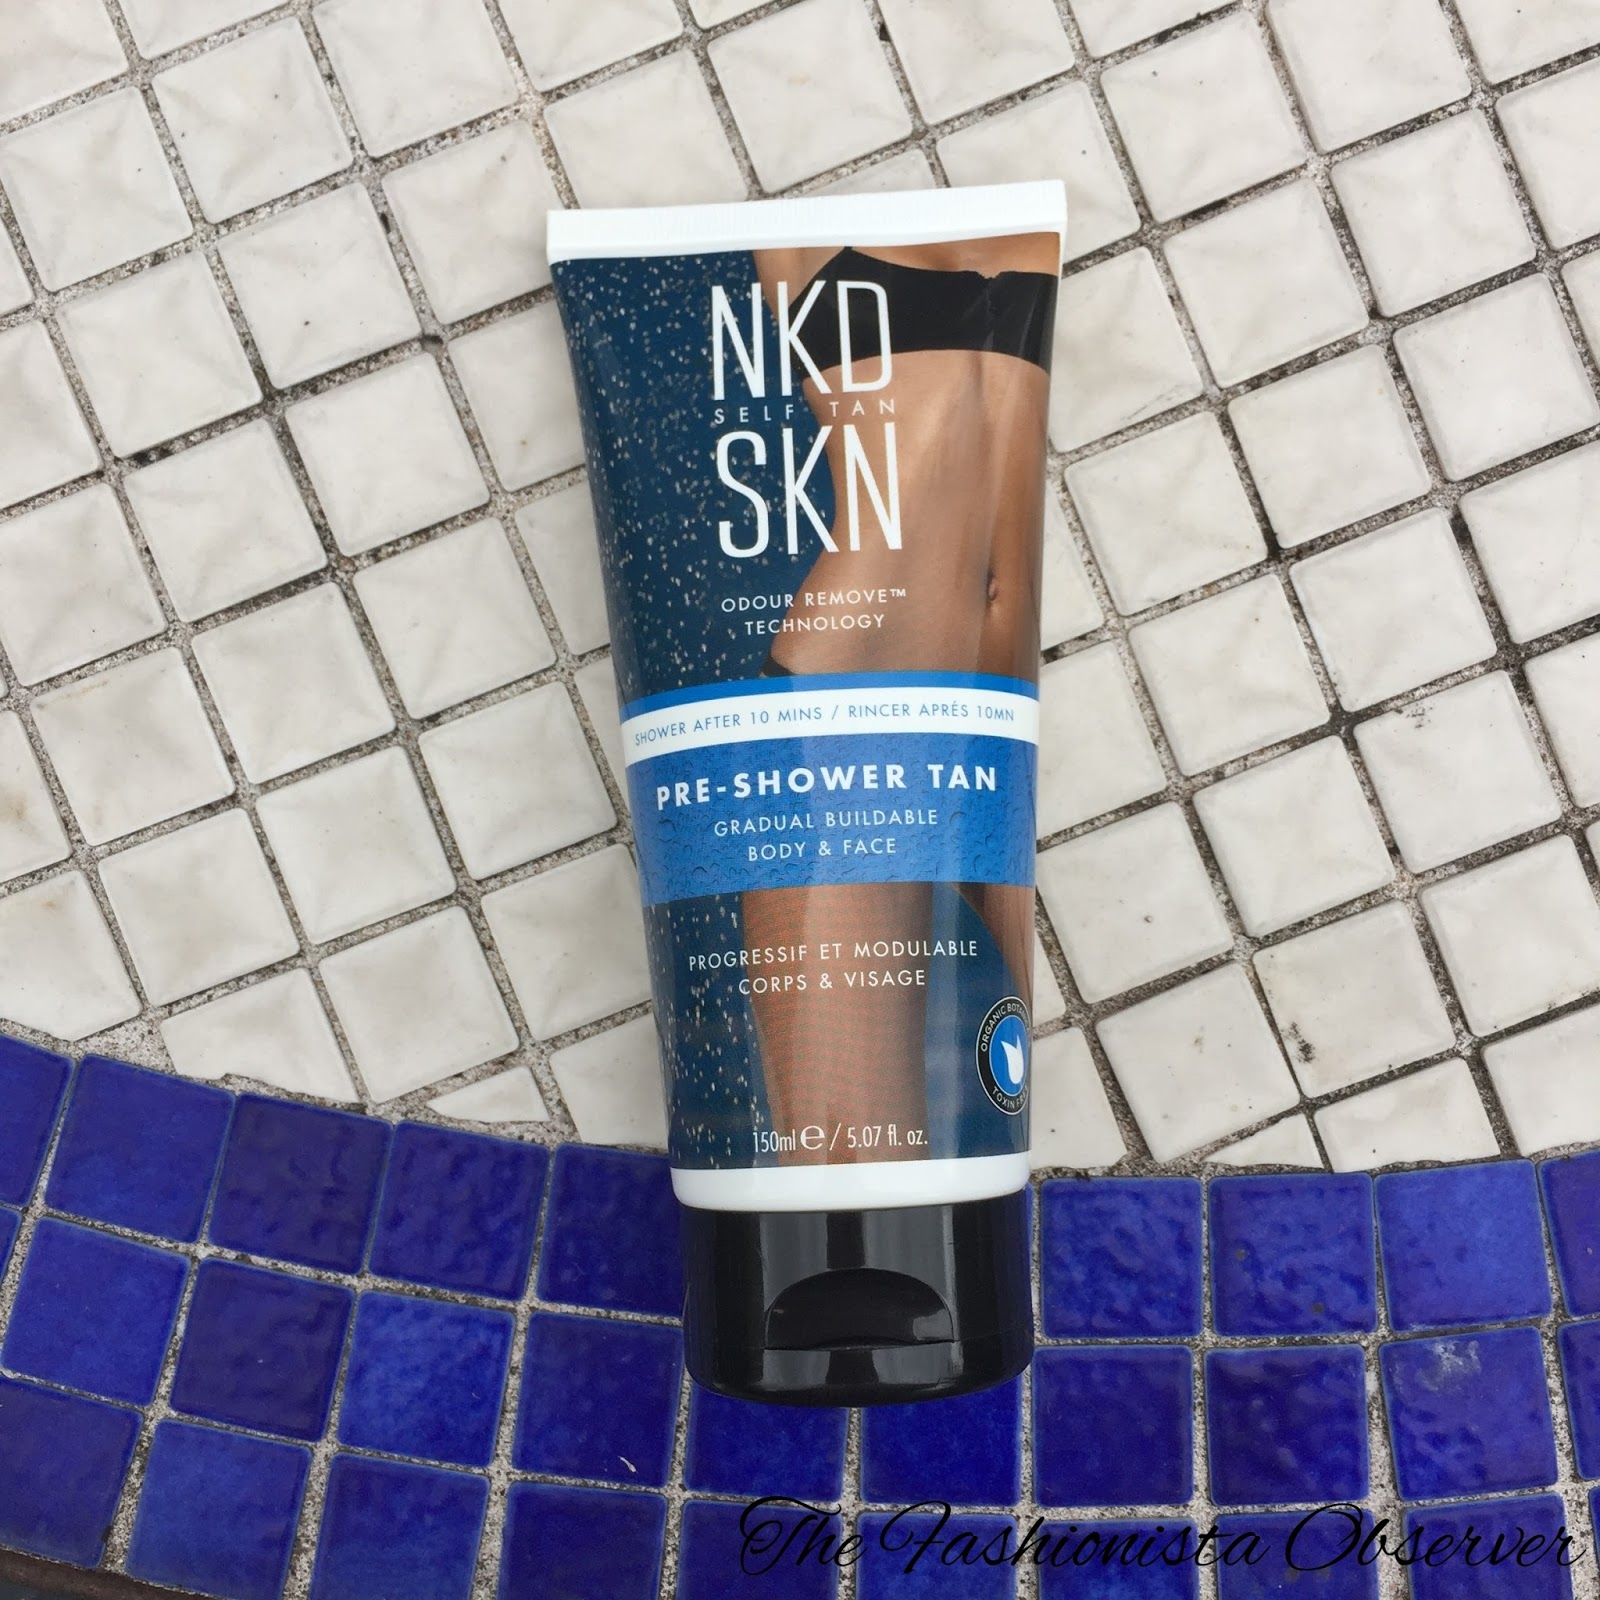 NKD SKN Pre Shower Tan Review – Can You Shower & Tan?